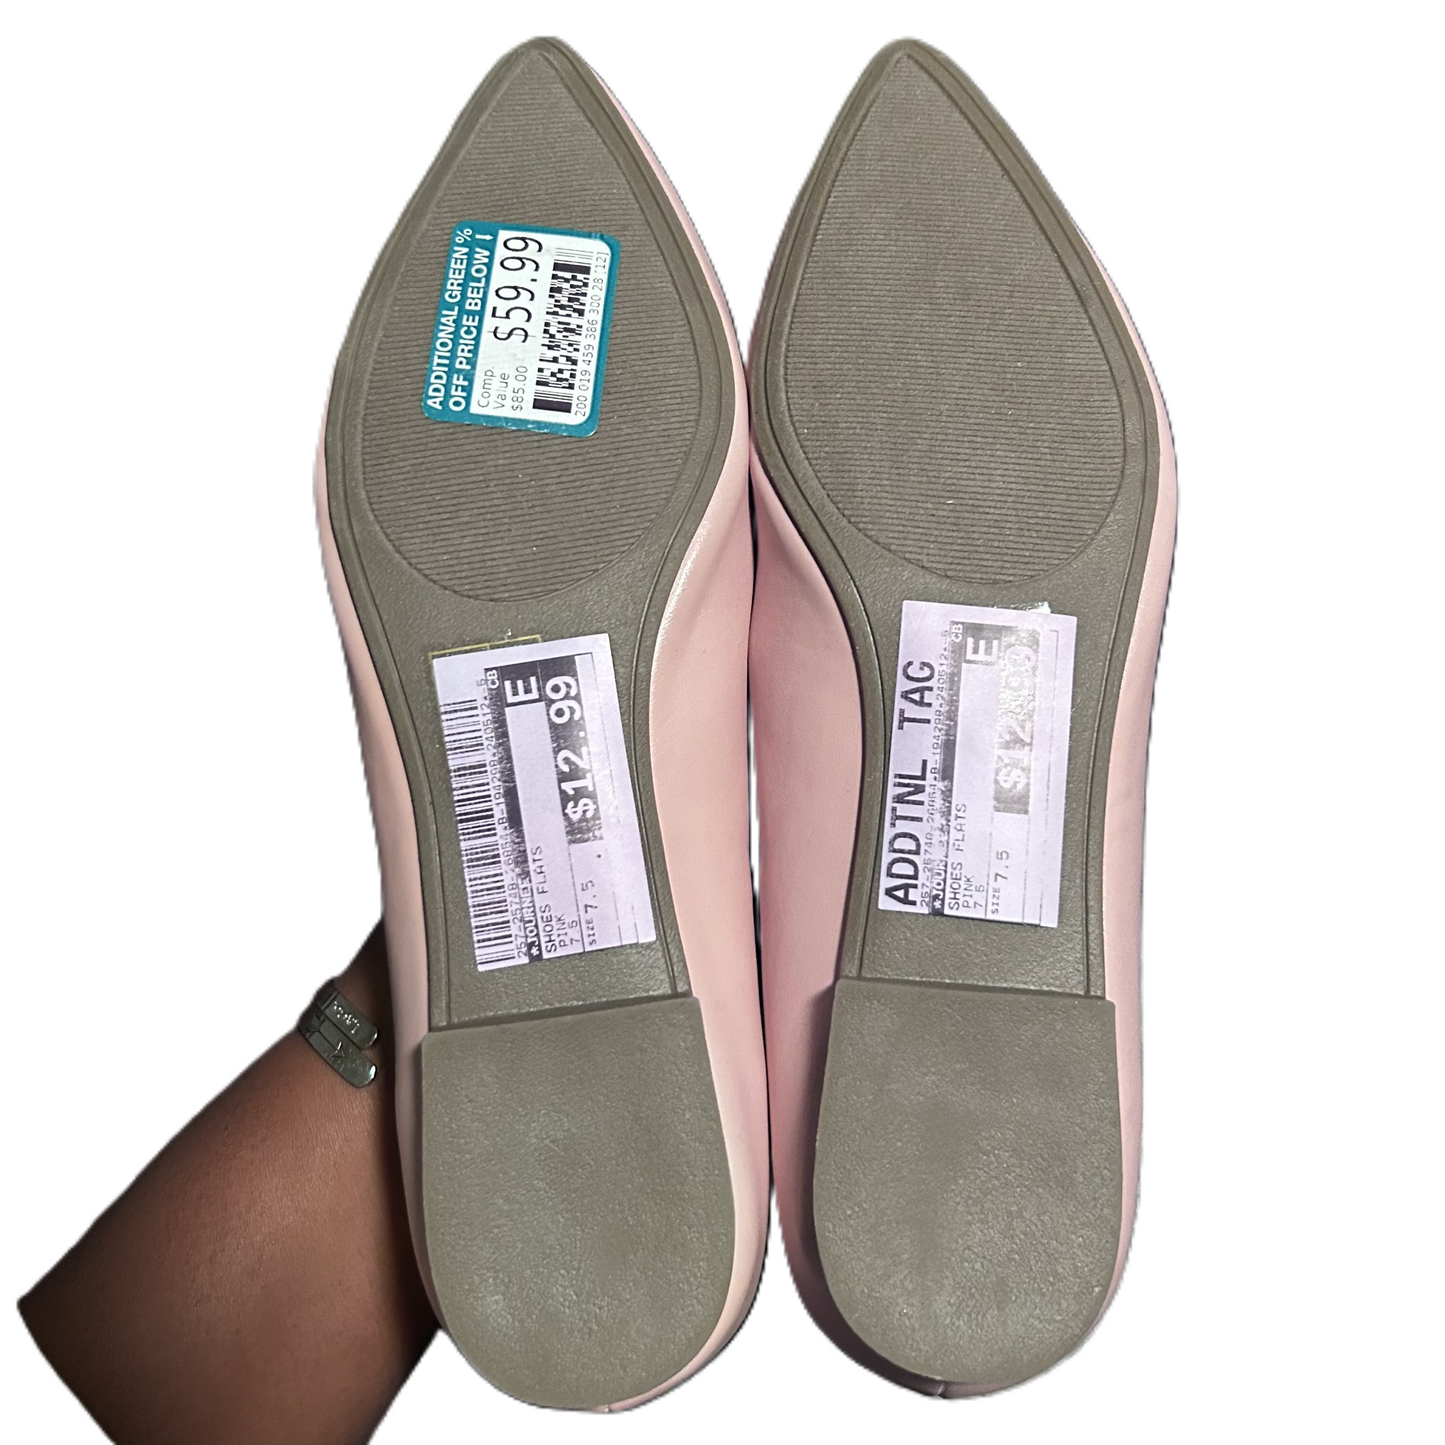 Shoes Flats By Journee  Size: 7.5